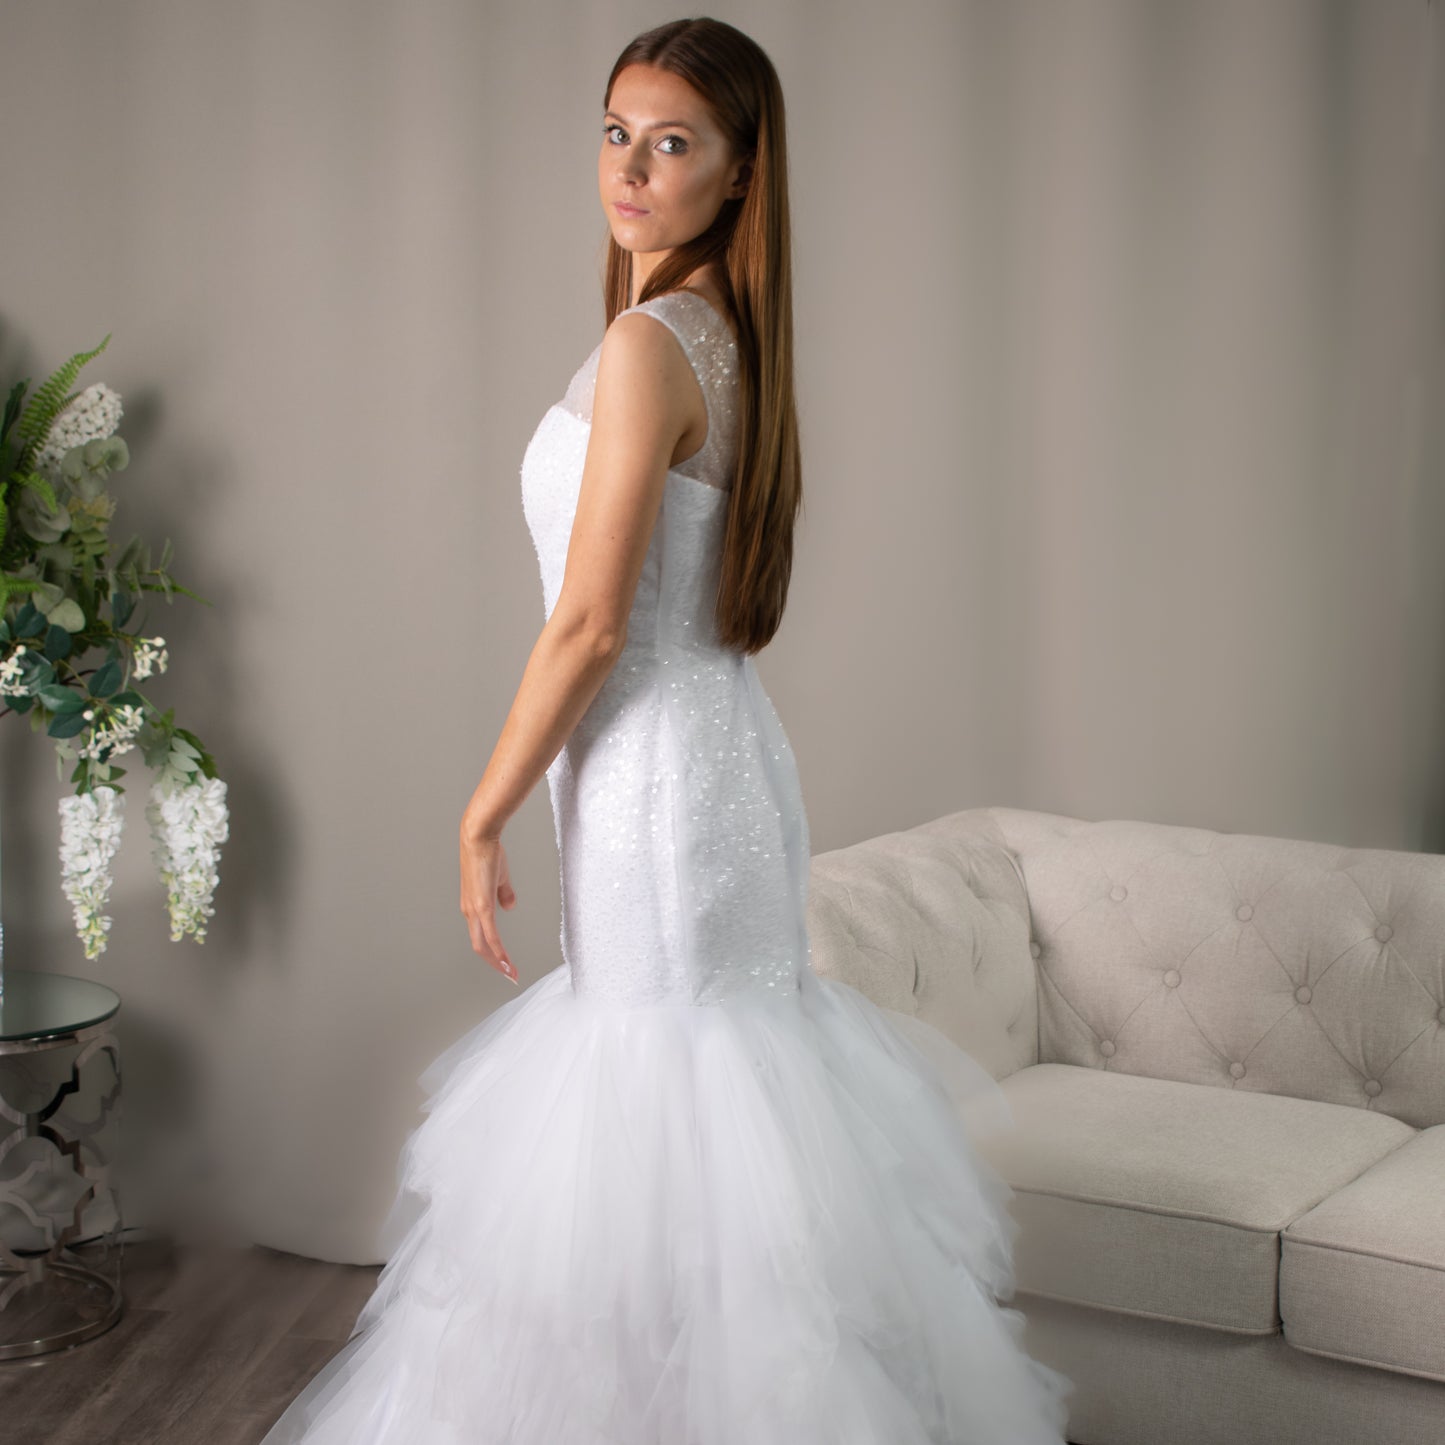 Harmony Beaded Tulle Debutante Dress with strap sweetheart neckline and mermaid silhouette.